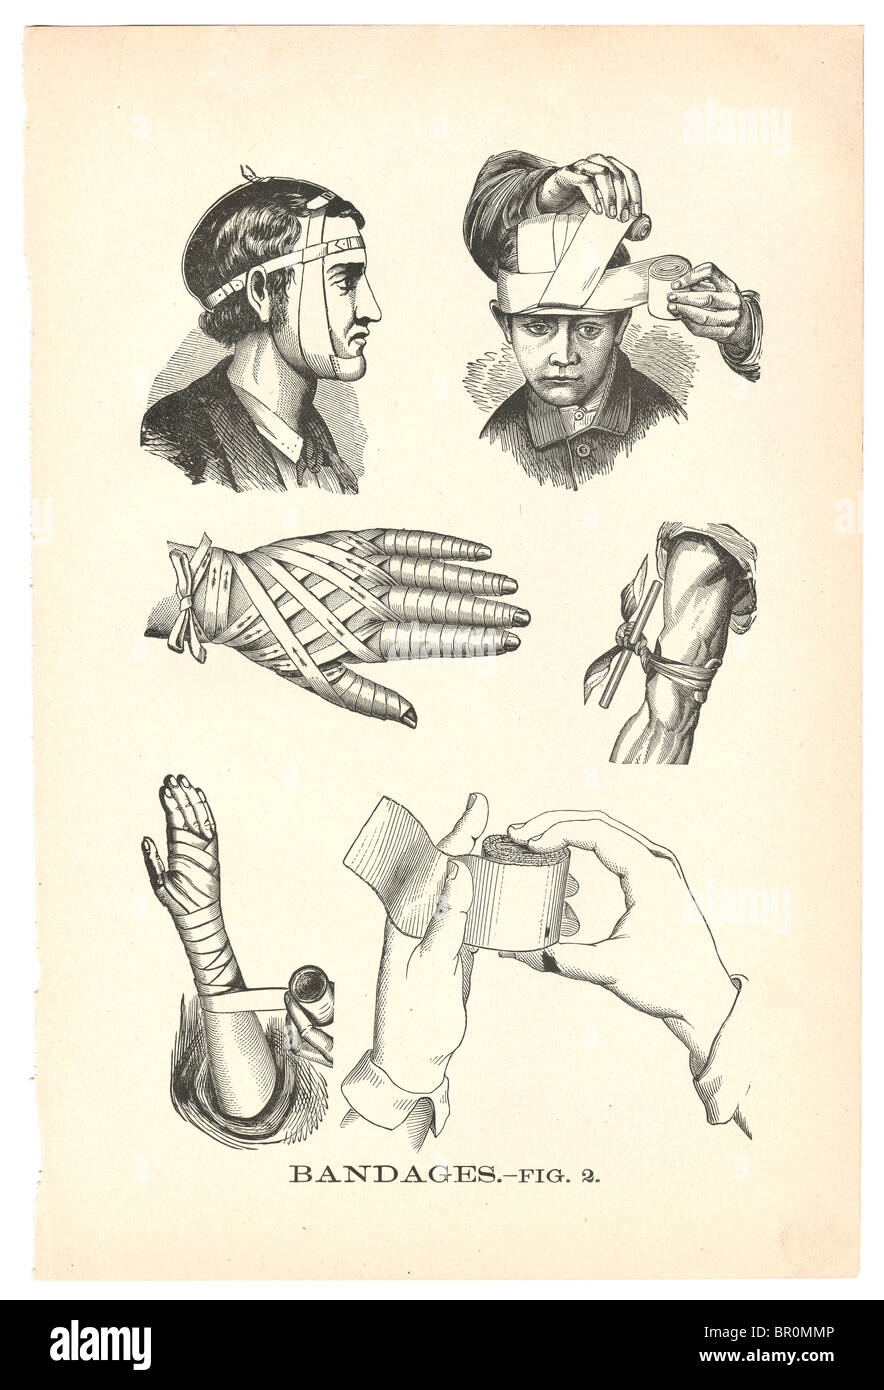 A page of illustrations of bandaged injuries from a vintage book Stock Photo